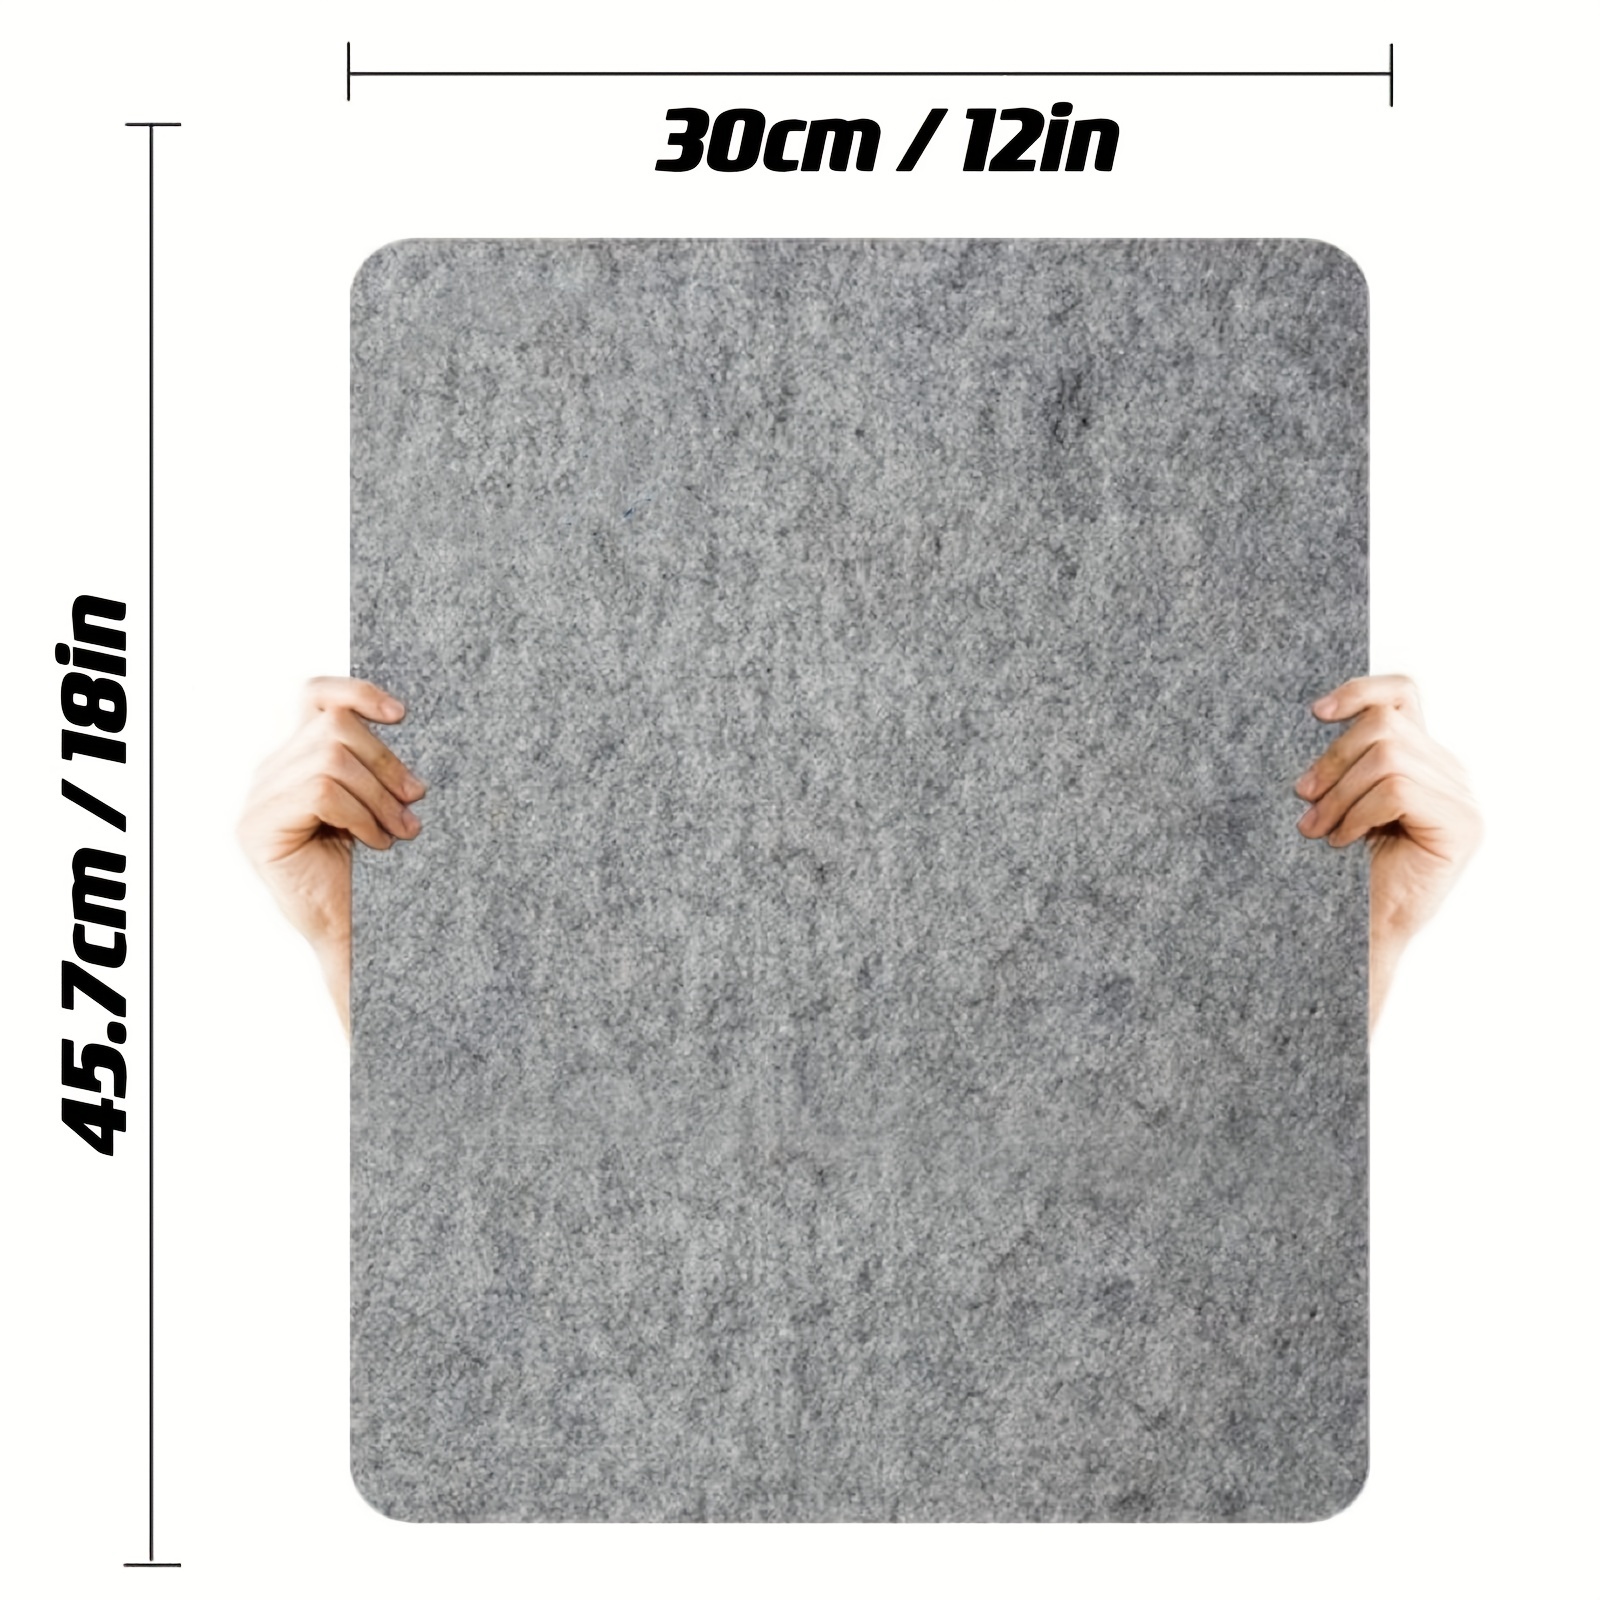 Premium Wool Pressing Mat Perfect For Quilting Ironing And - Temu